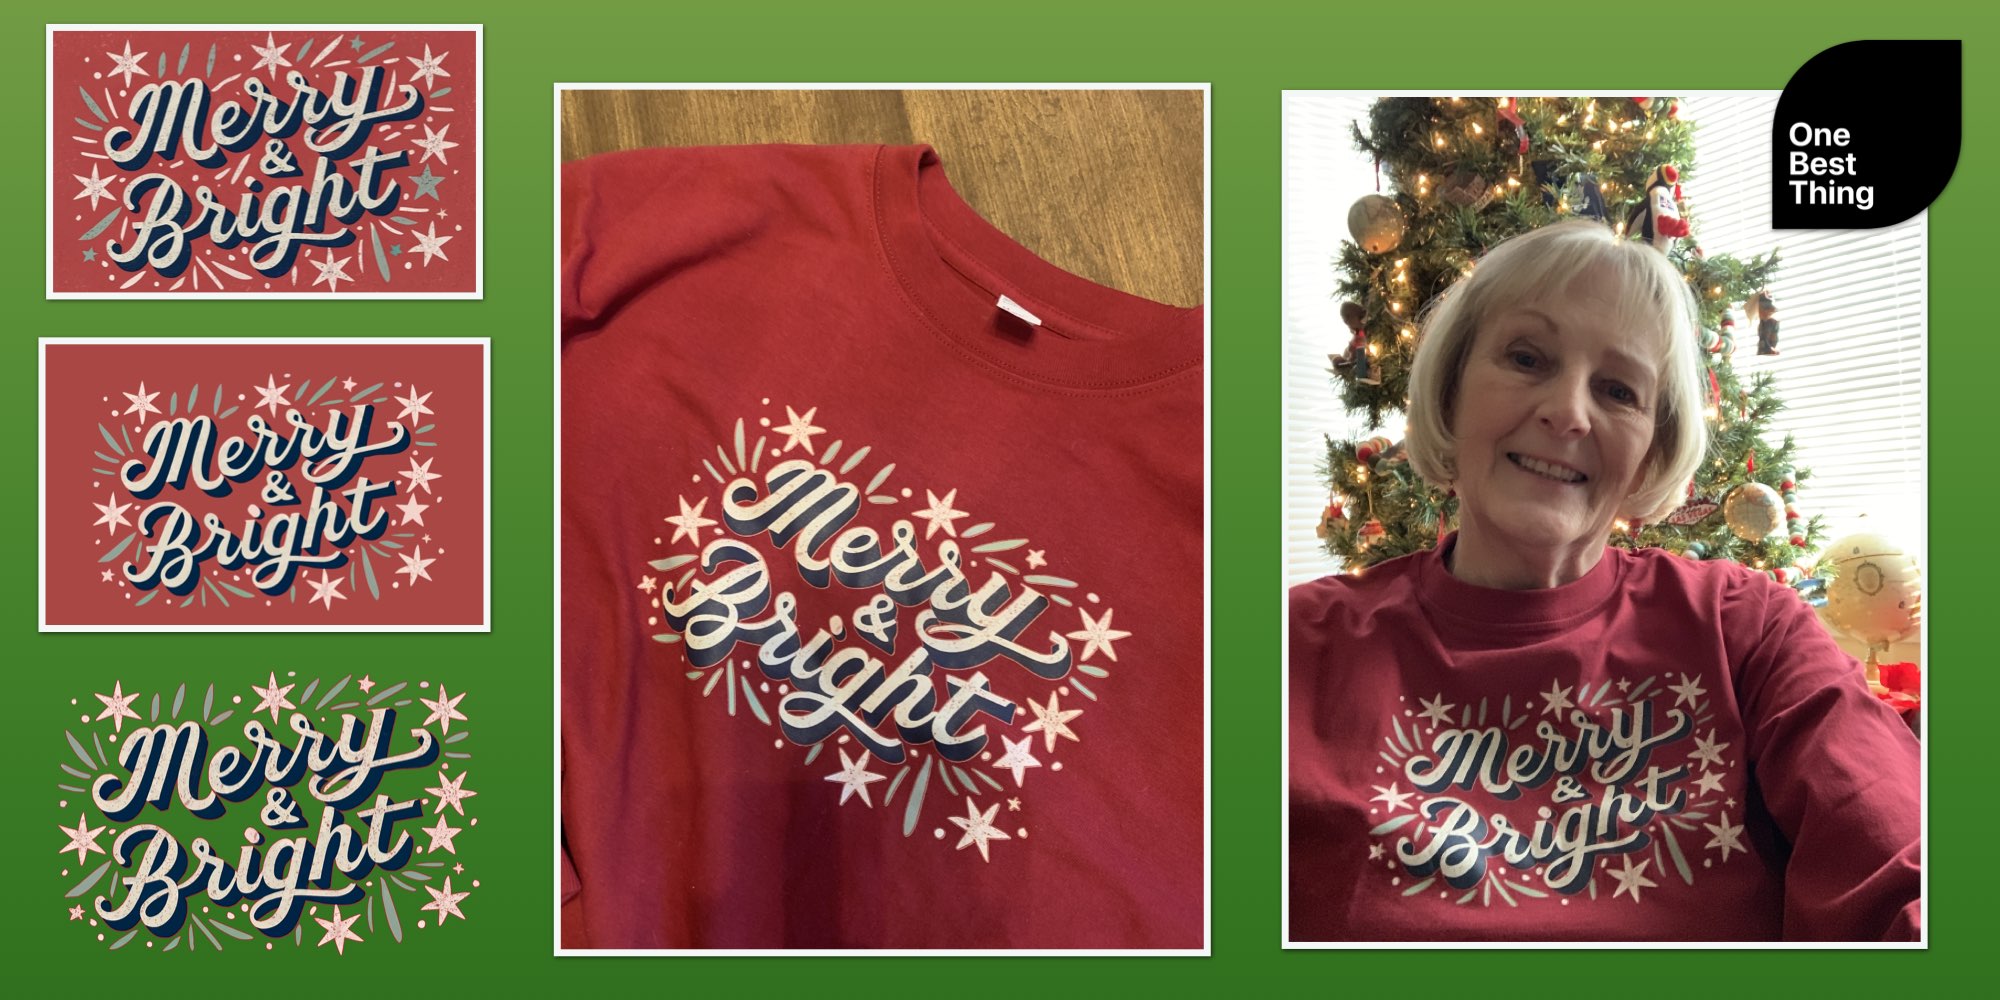 "Merry and Bright" logo transferred onto a t-shirt